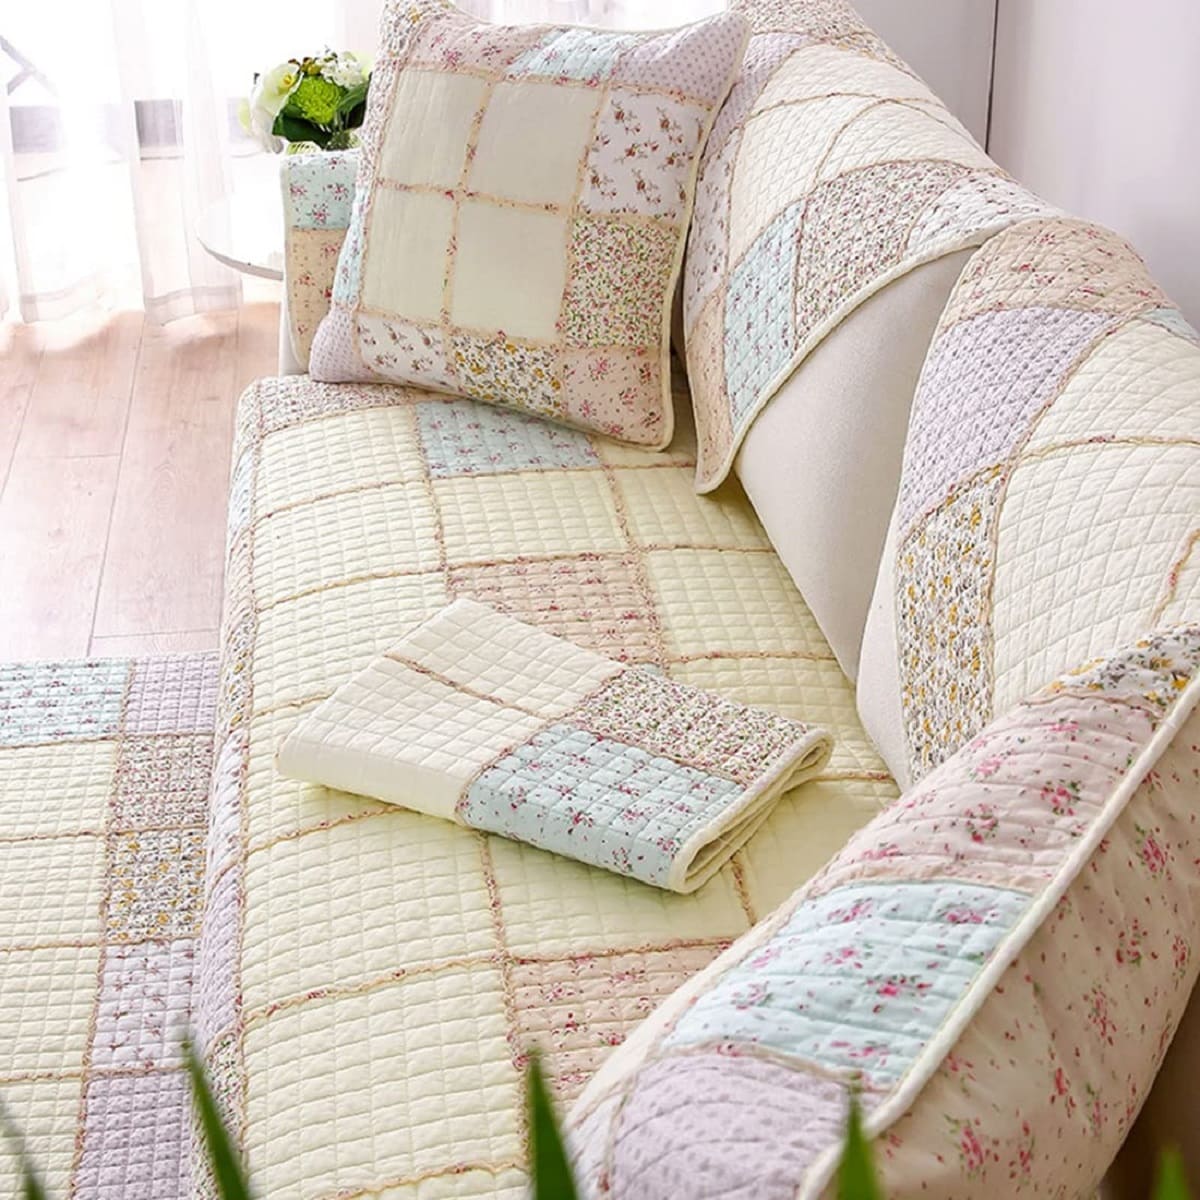 How To Use A Quilt As A Slipcover